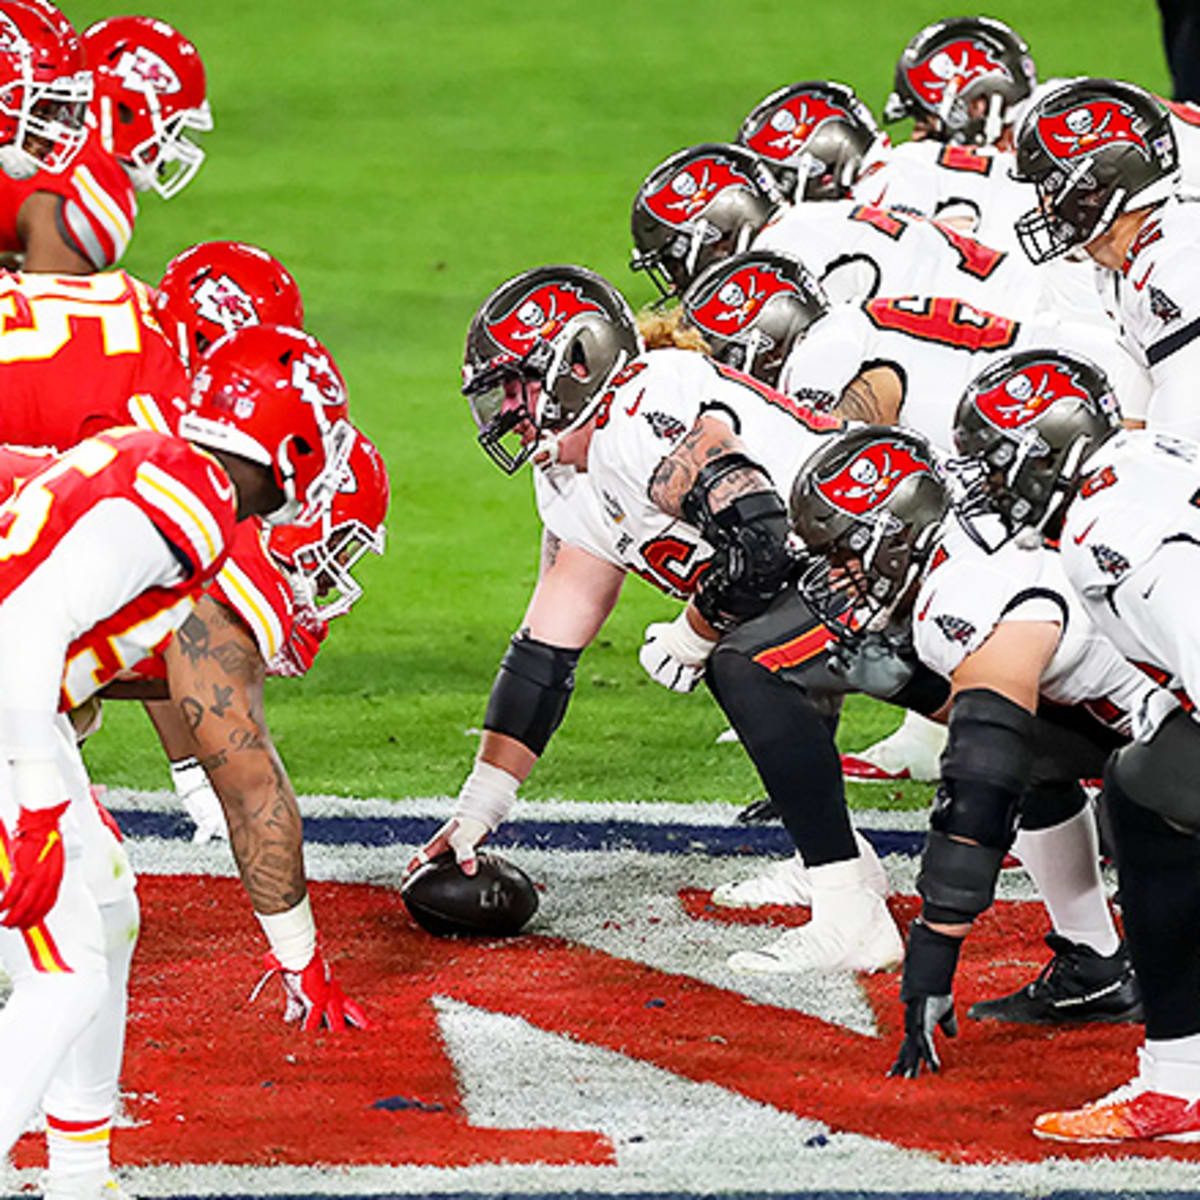 NFL Makes Official Decision On Sunday Night's Buccaneers vs